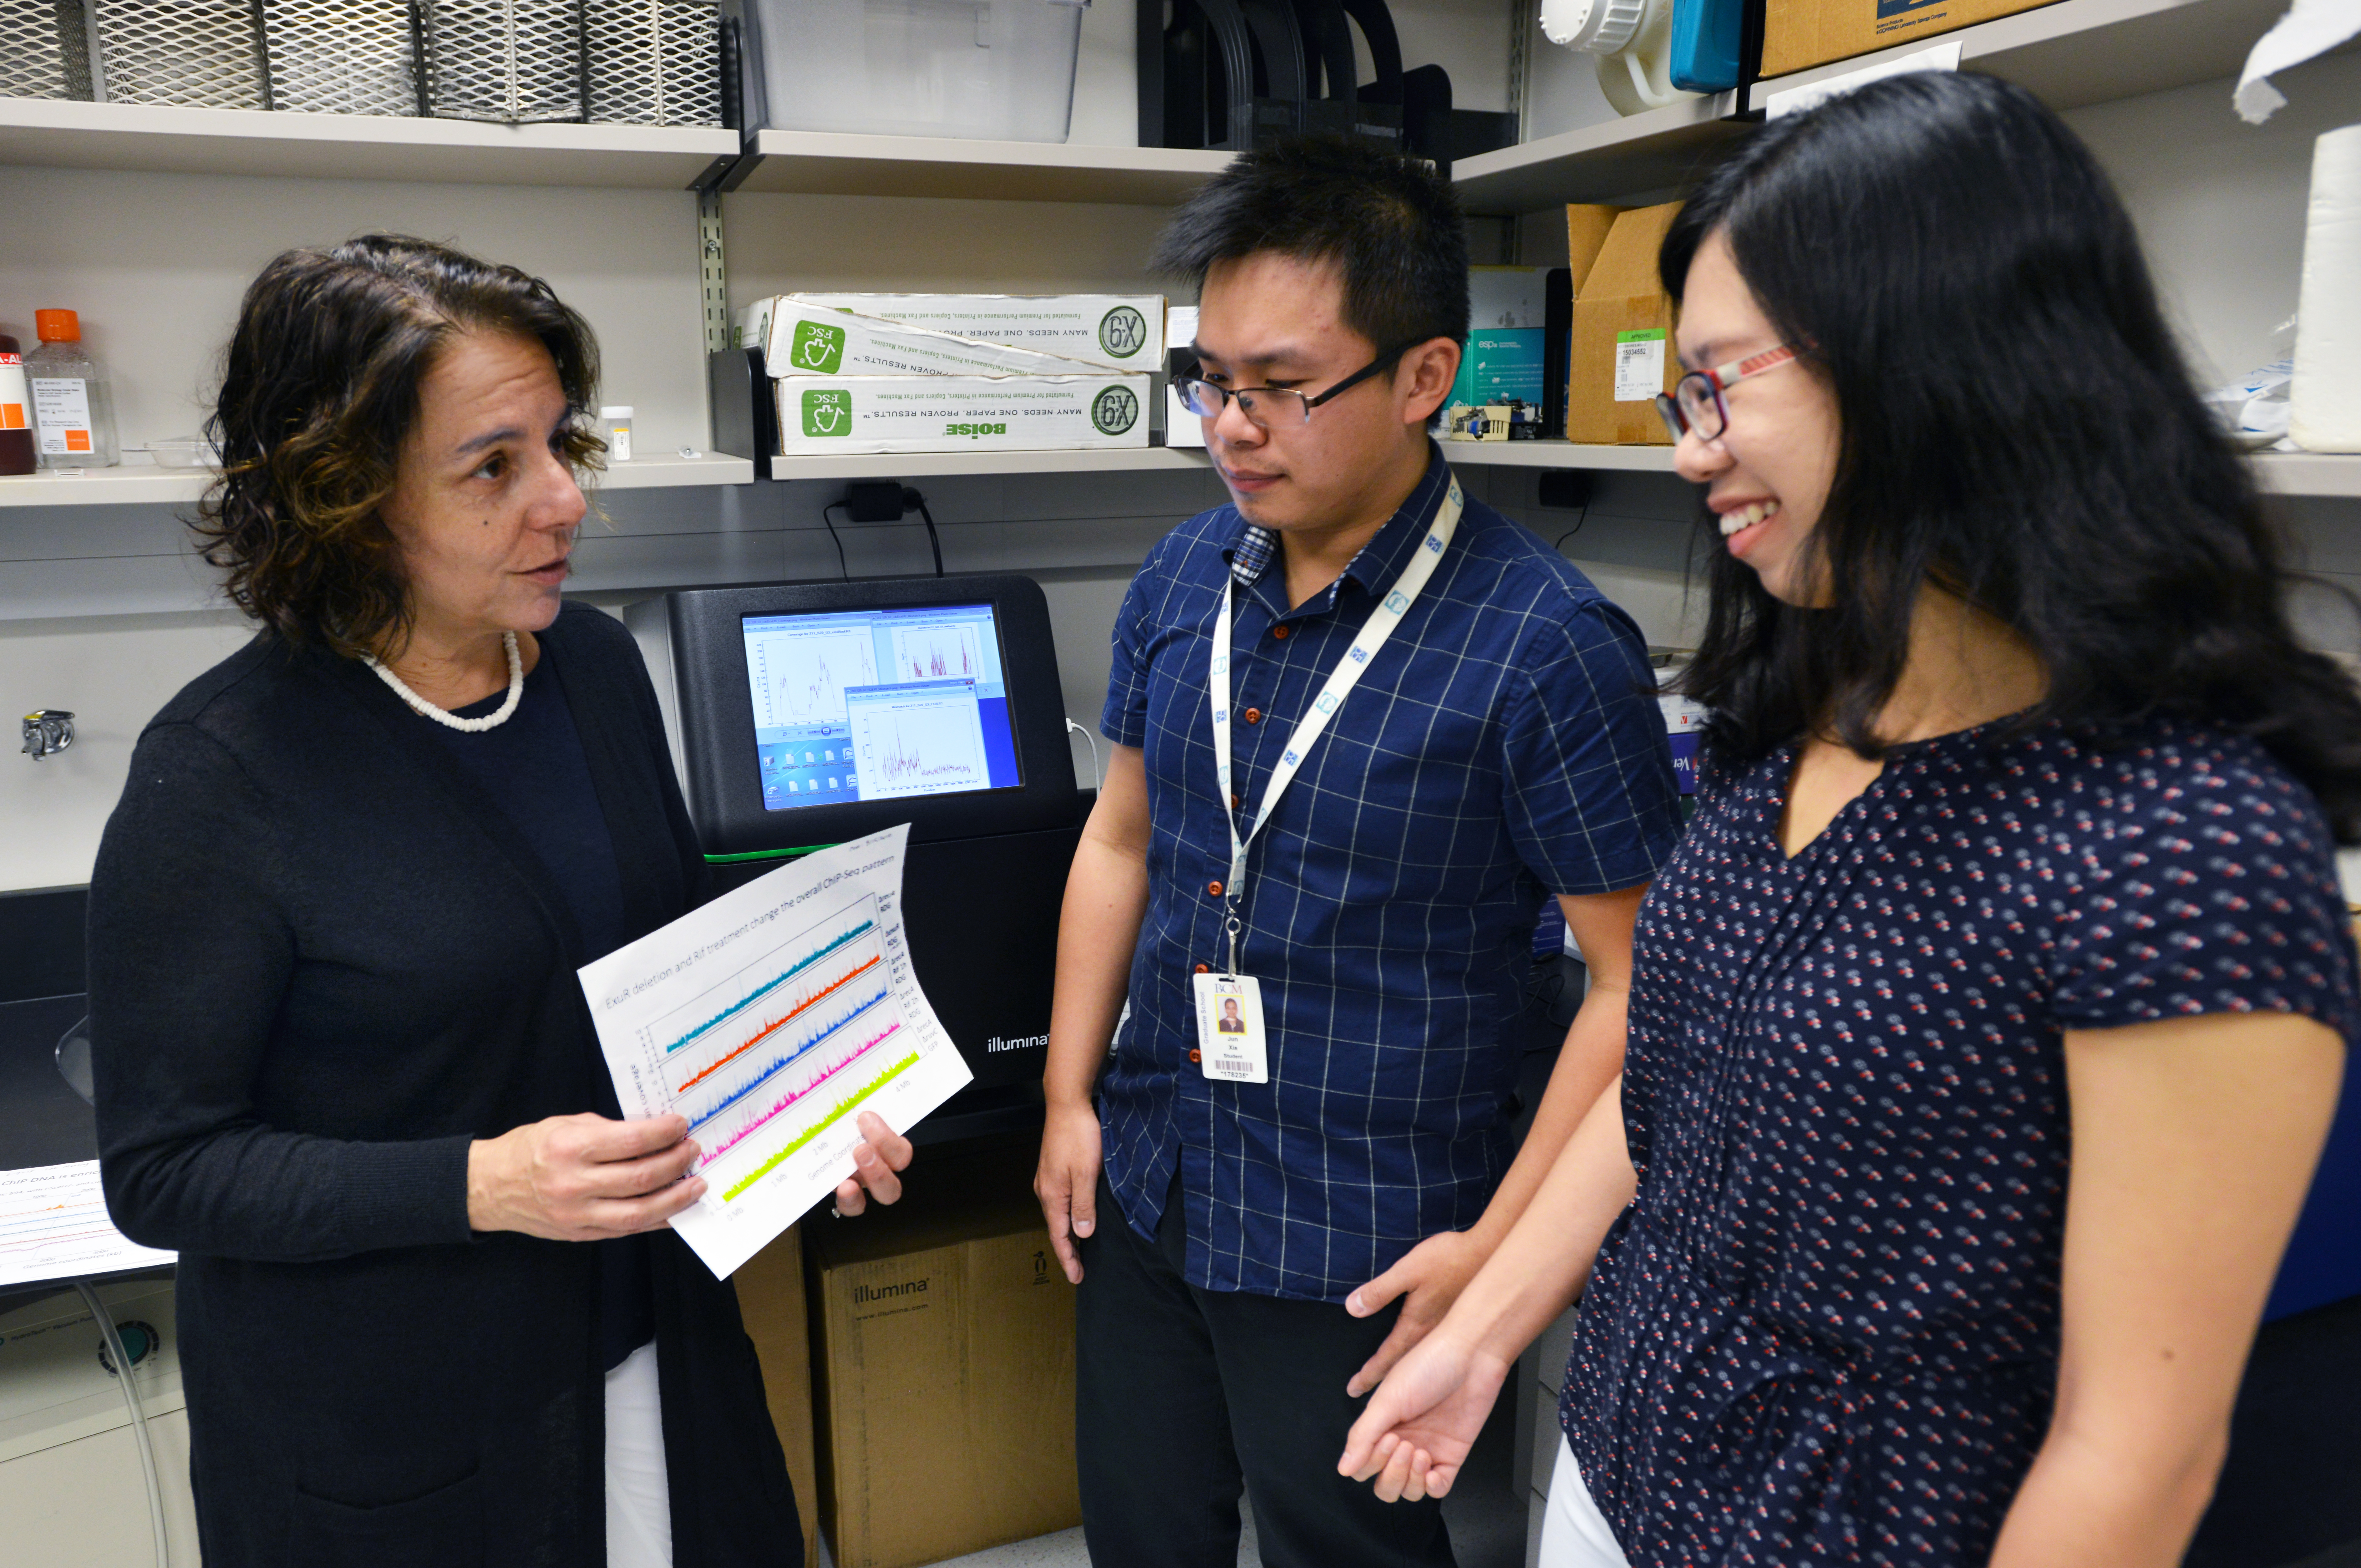 Dr. Susan Rosenberg discusses data with co-authors Jun Xia and Qian Mei.